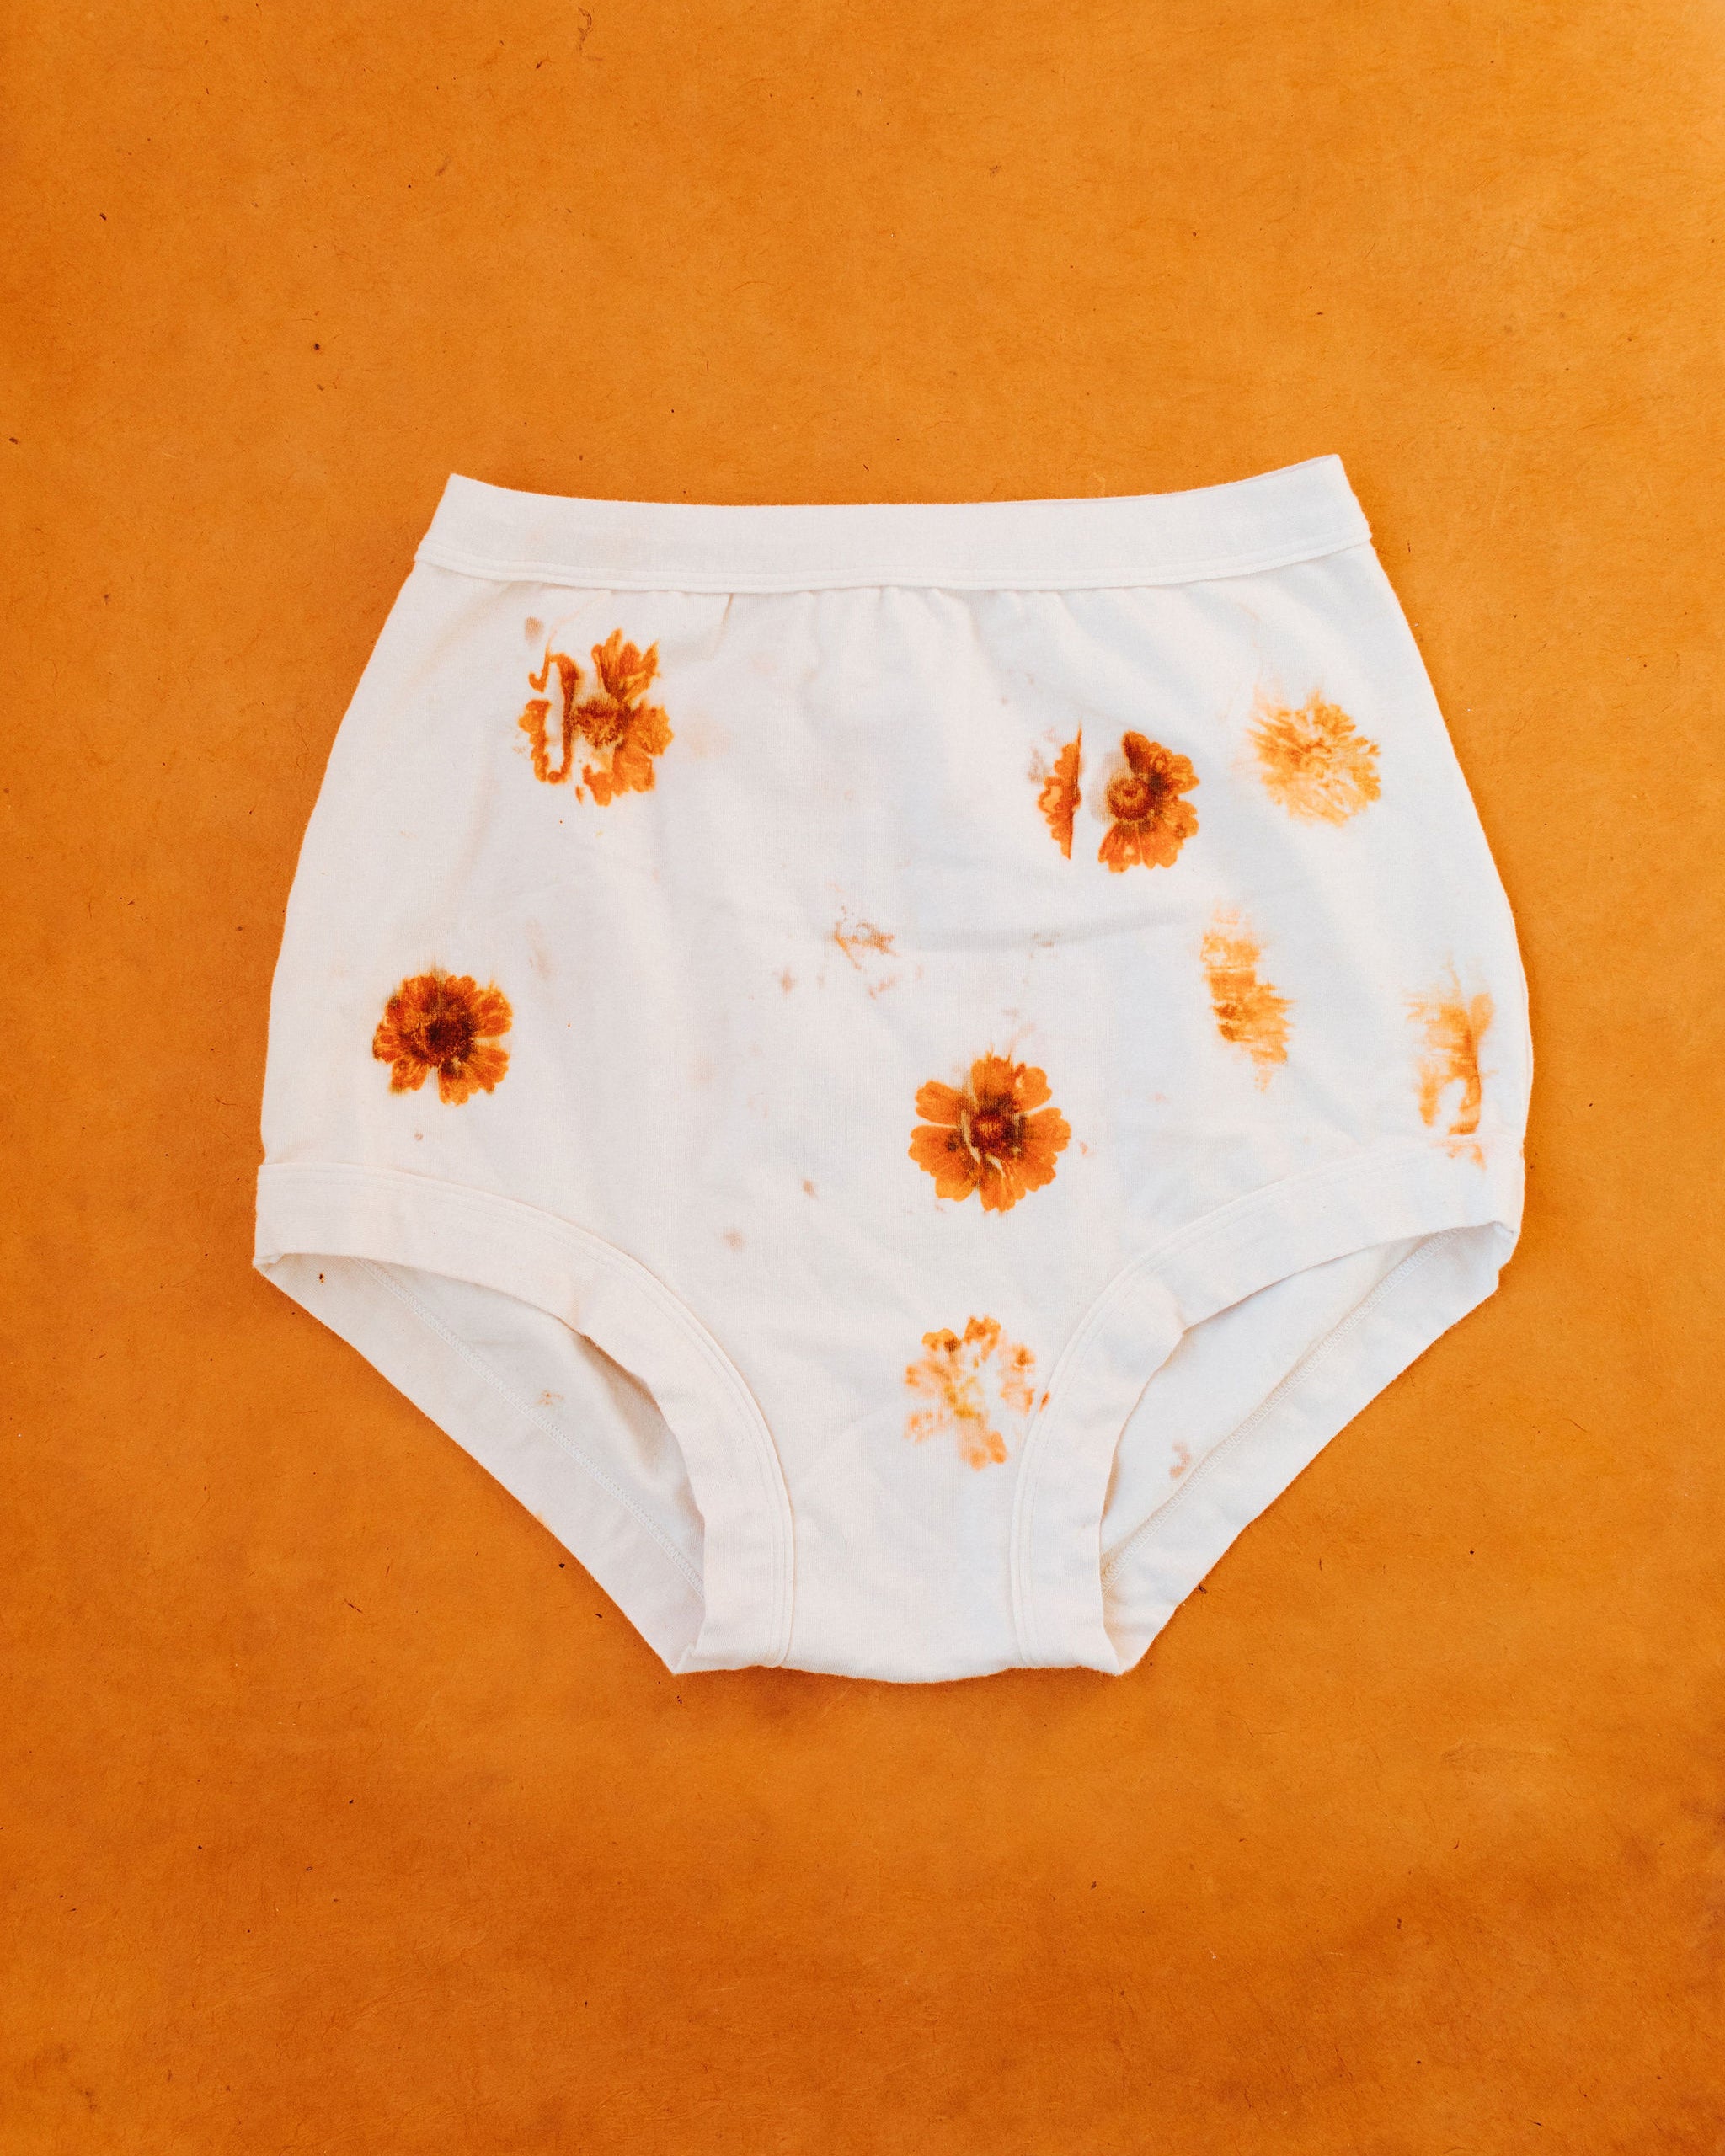 Flat lay on an orange surface of Thunderpants Sky Rise style underwear in the Limited Edition Flower Press Botanical Dye - flowers pressed on the underwear to create a print.